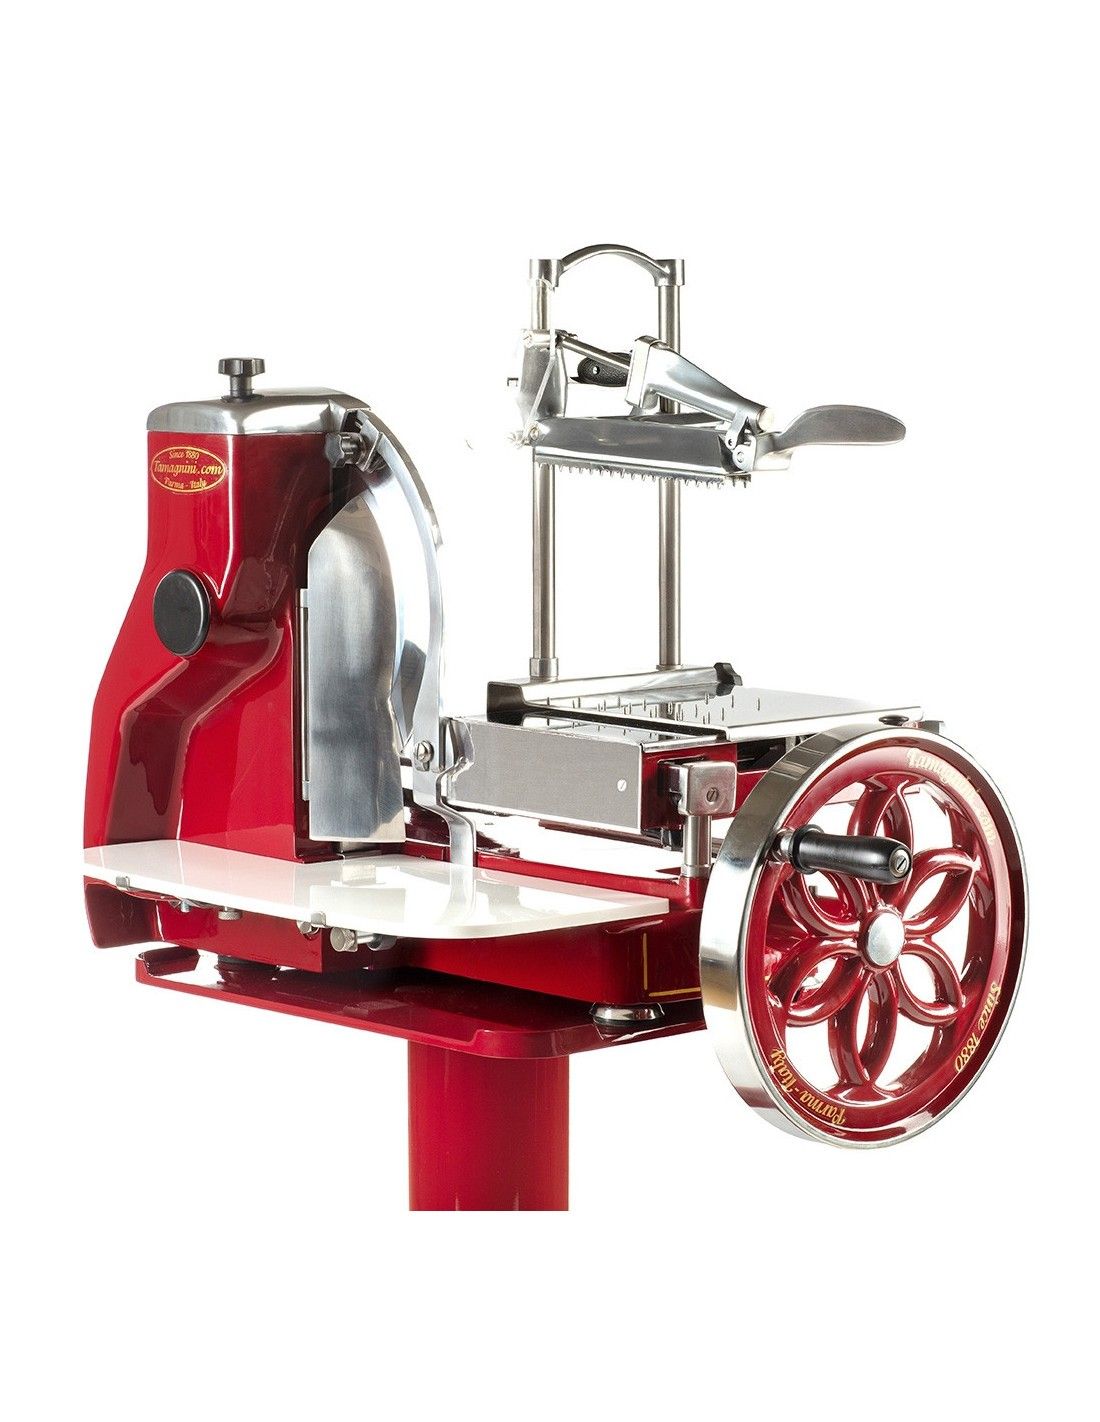 Flywheel Slicer mod.330 - best way to cut your Prosciutto di Parma